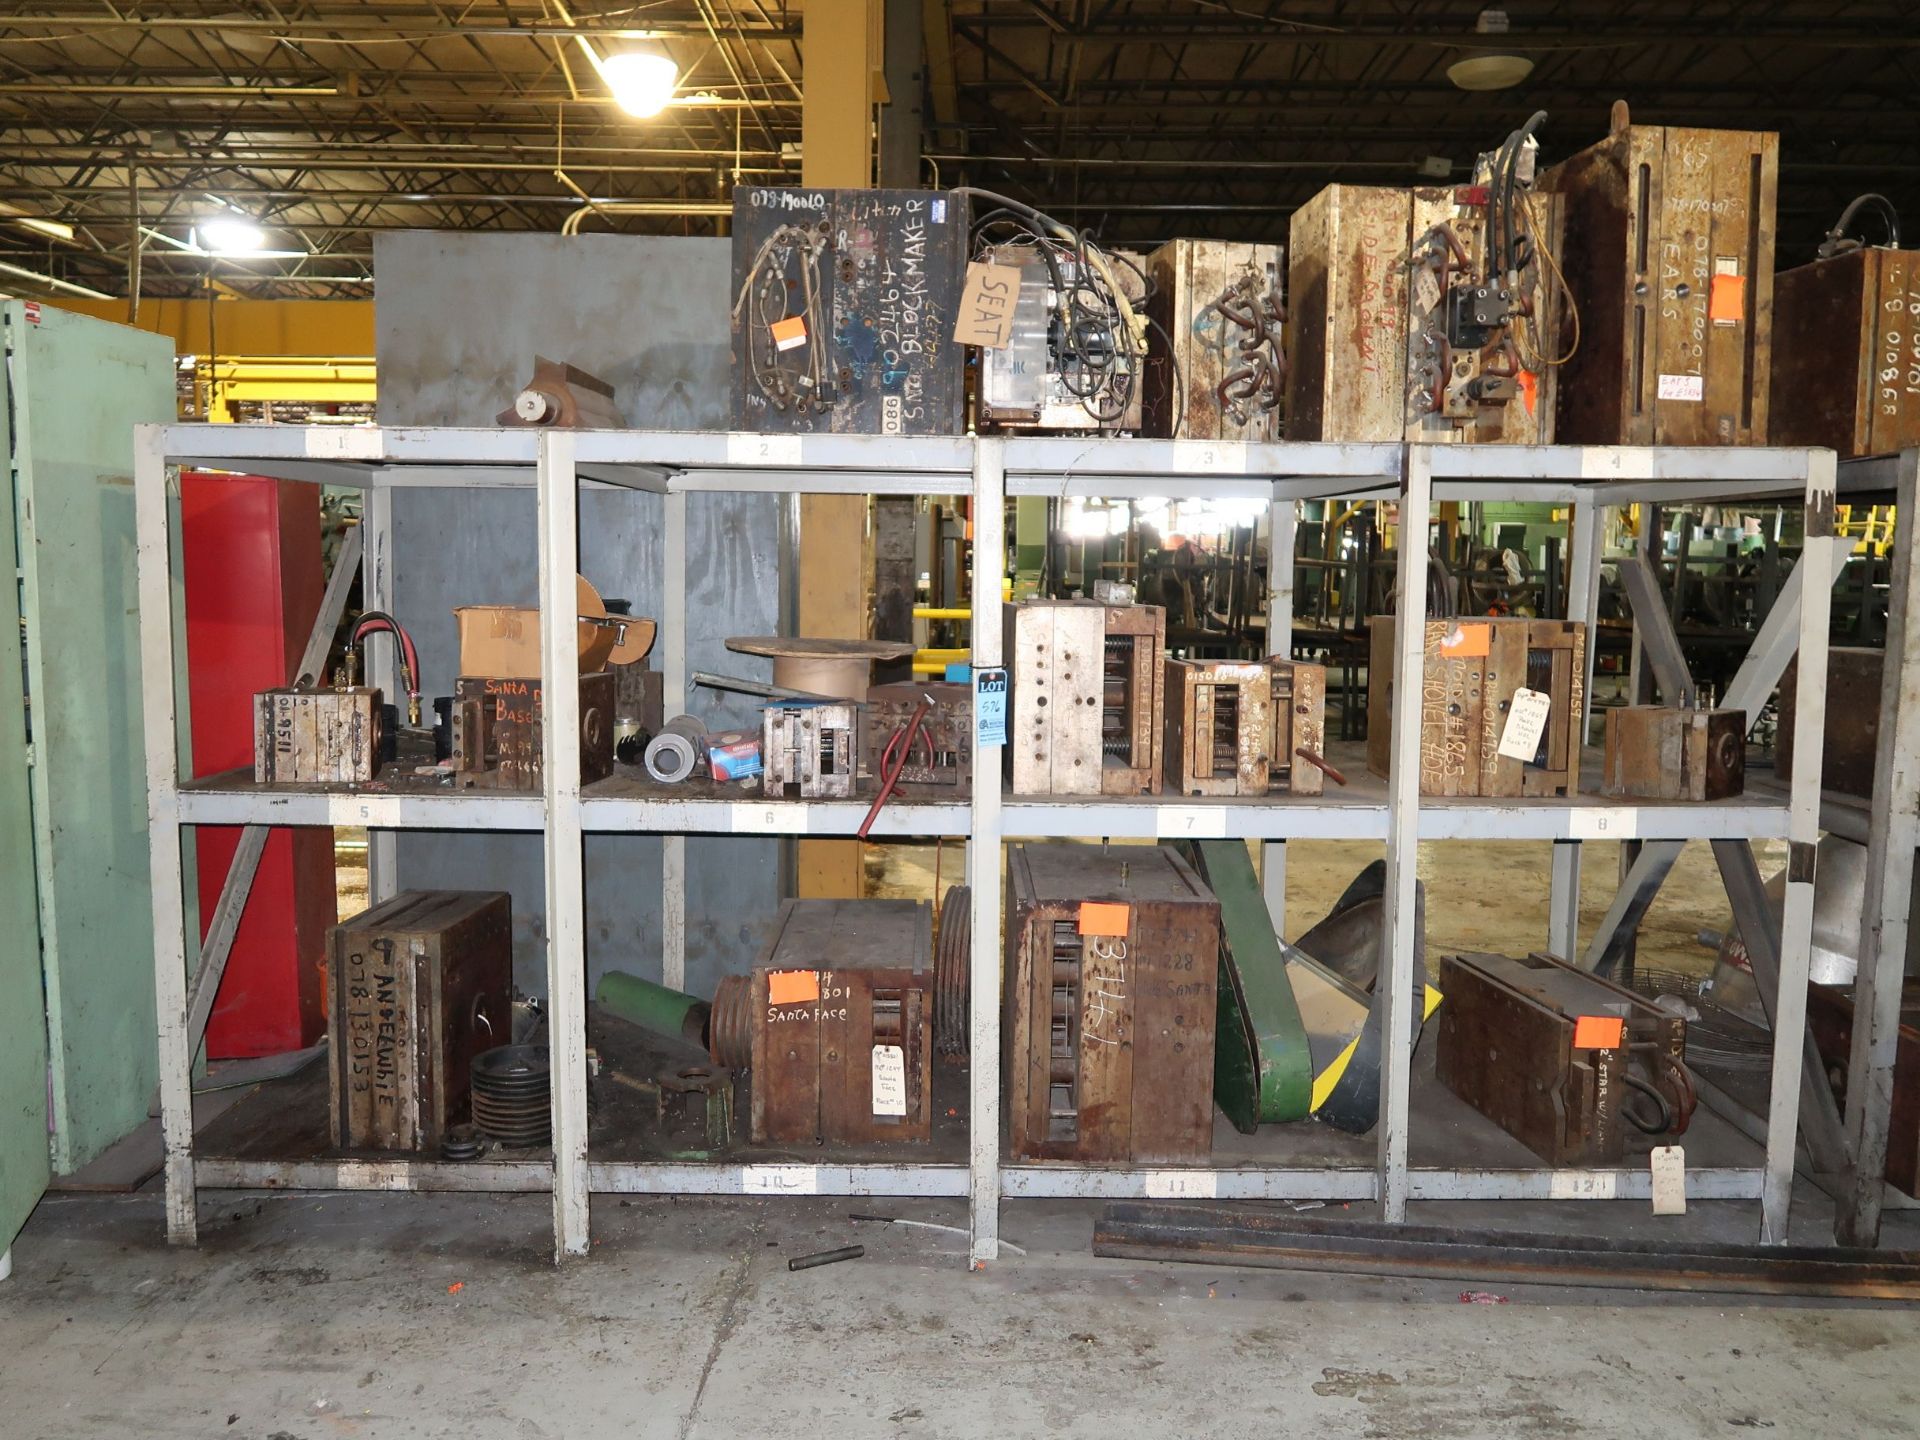 (LOT) RACK WITH (15) STEEL MOLDS - SOLD BY THE LOT